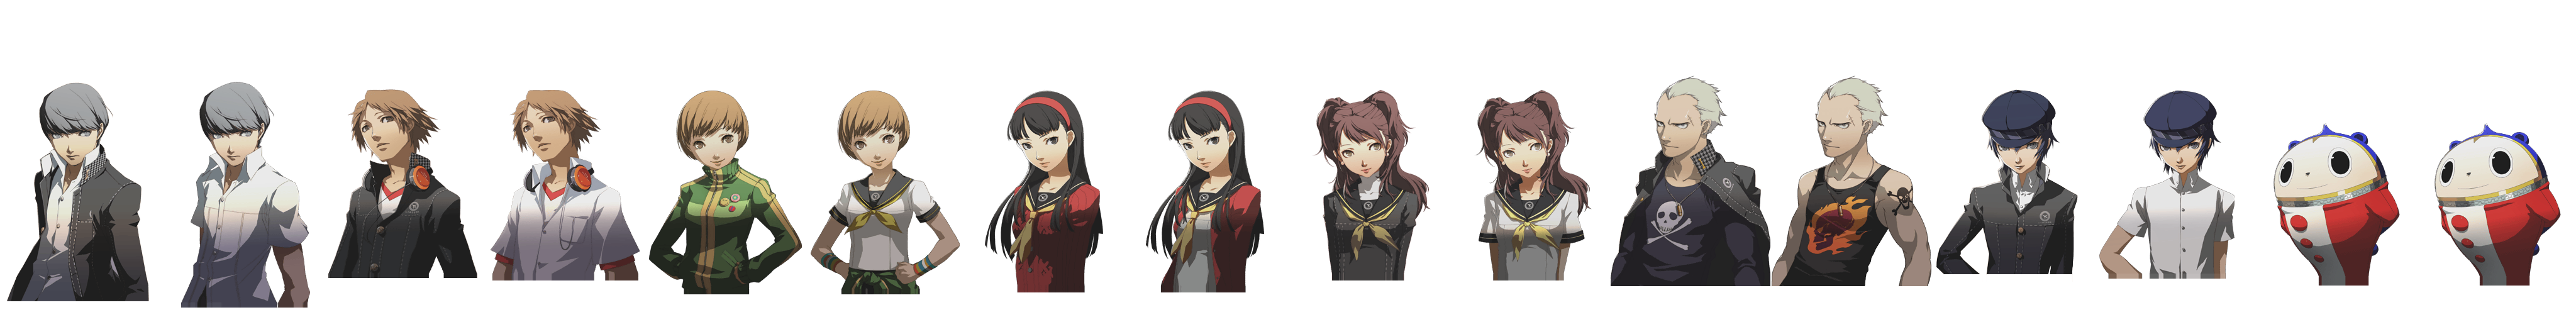 Persona 4 - Bustup Icons